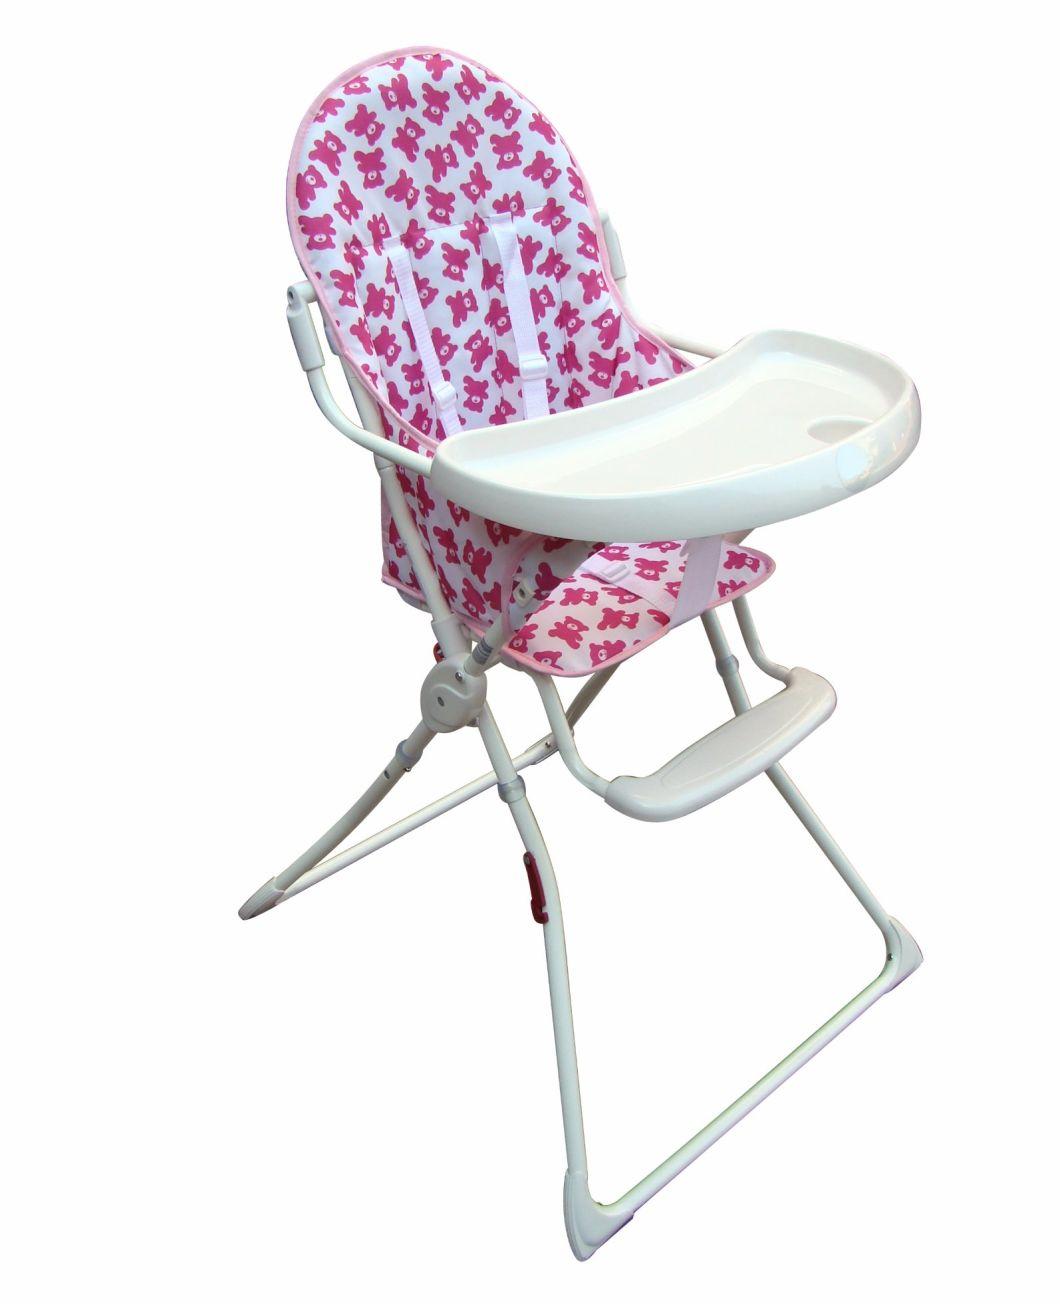 Iron Dinner Chair High Chair Wich Ce Certifate